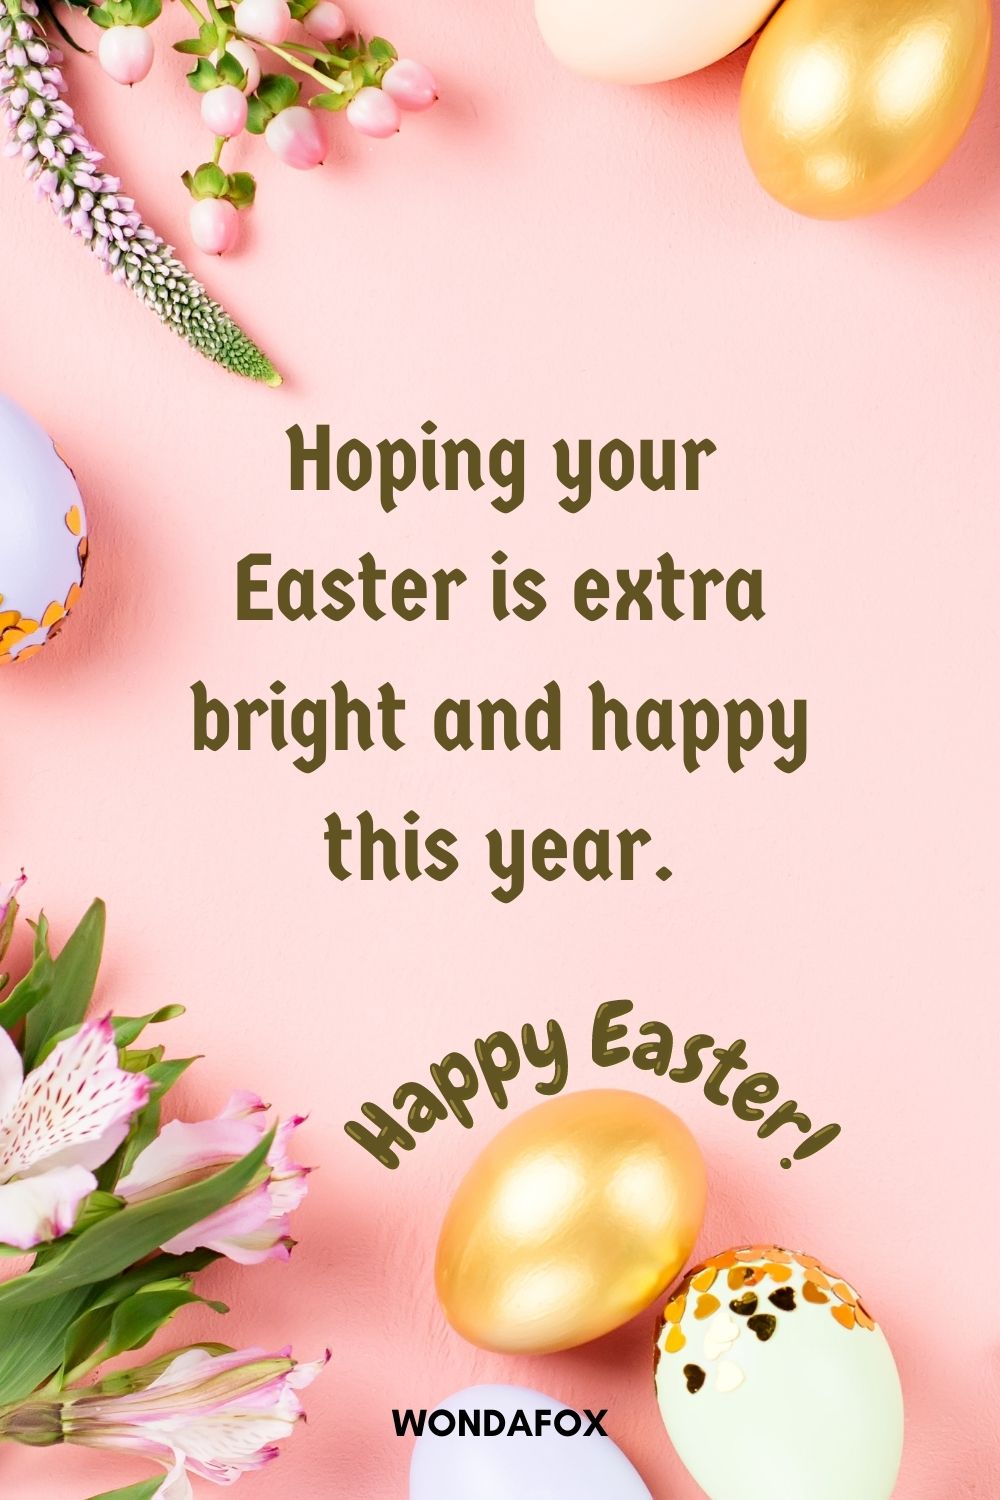 Hoping your Easter is extra bright and happy this year.